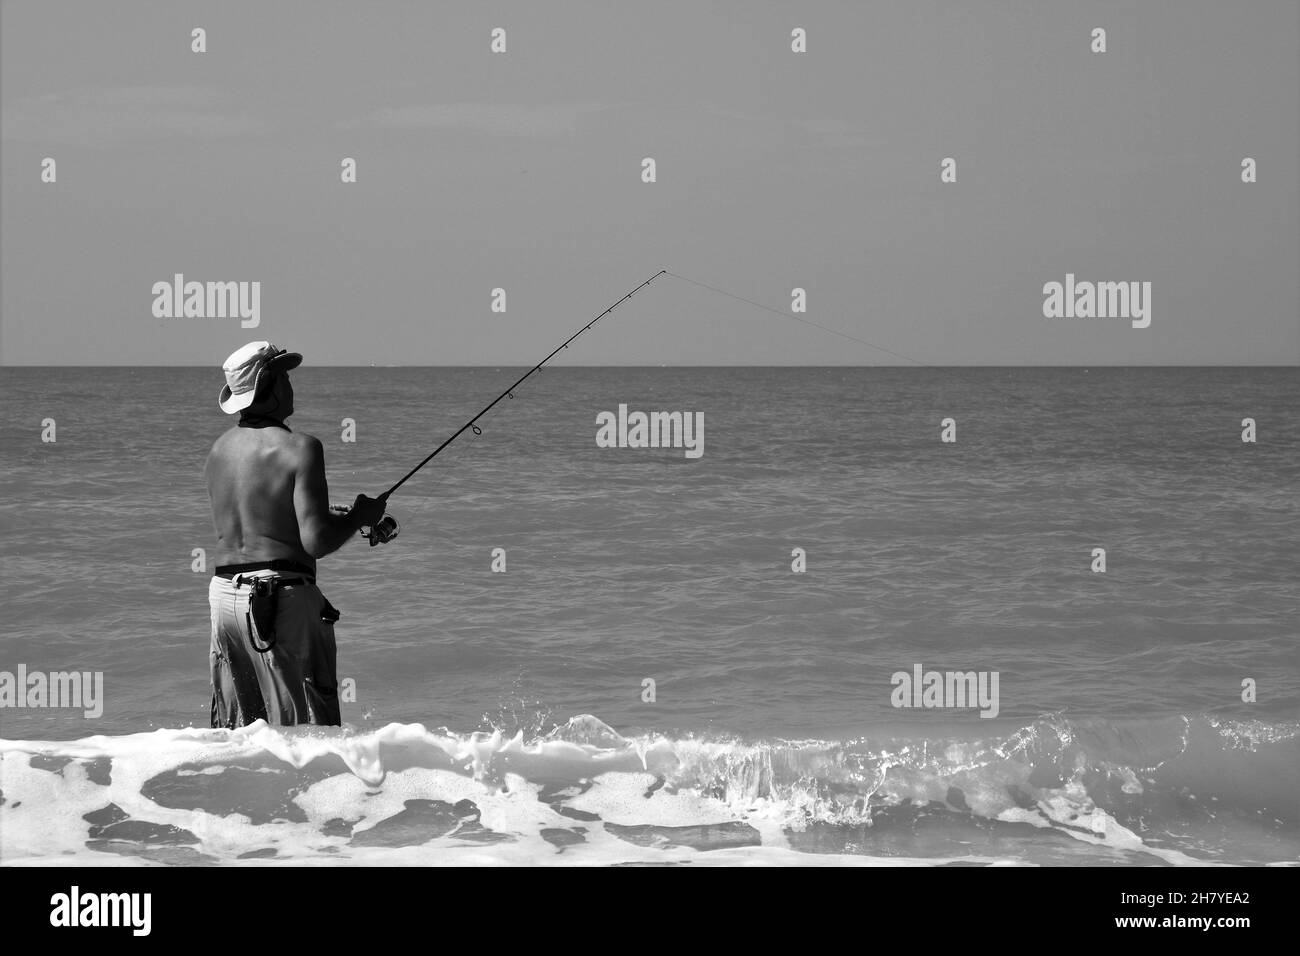 Man with hat fishing in ocean Stock Photo